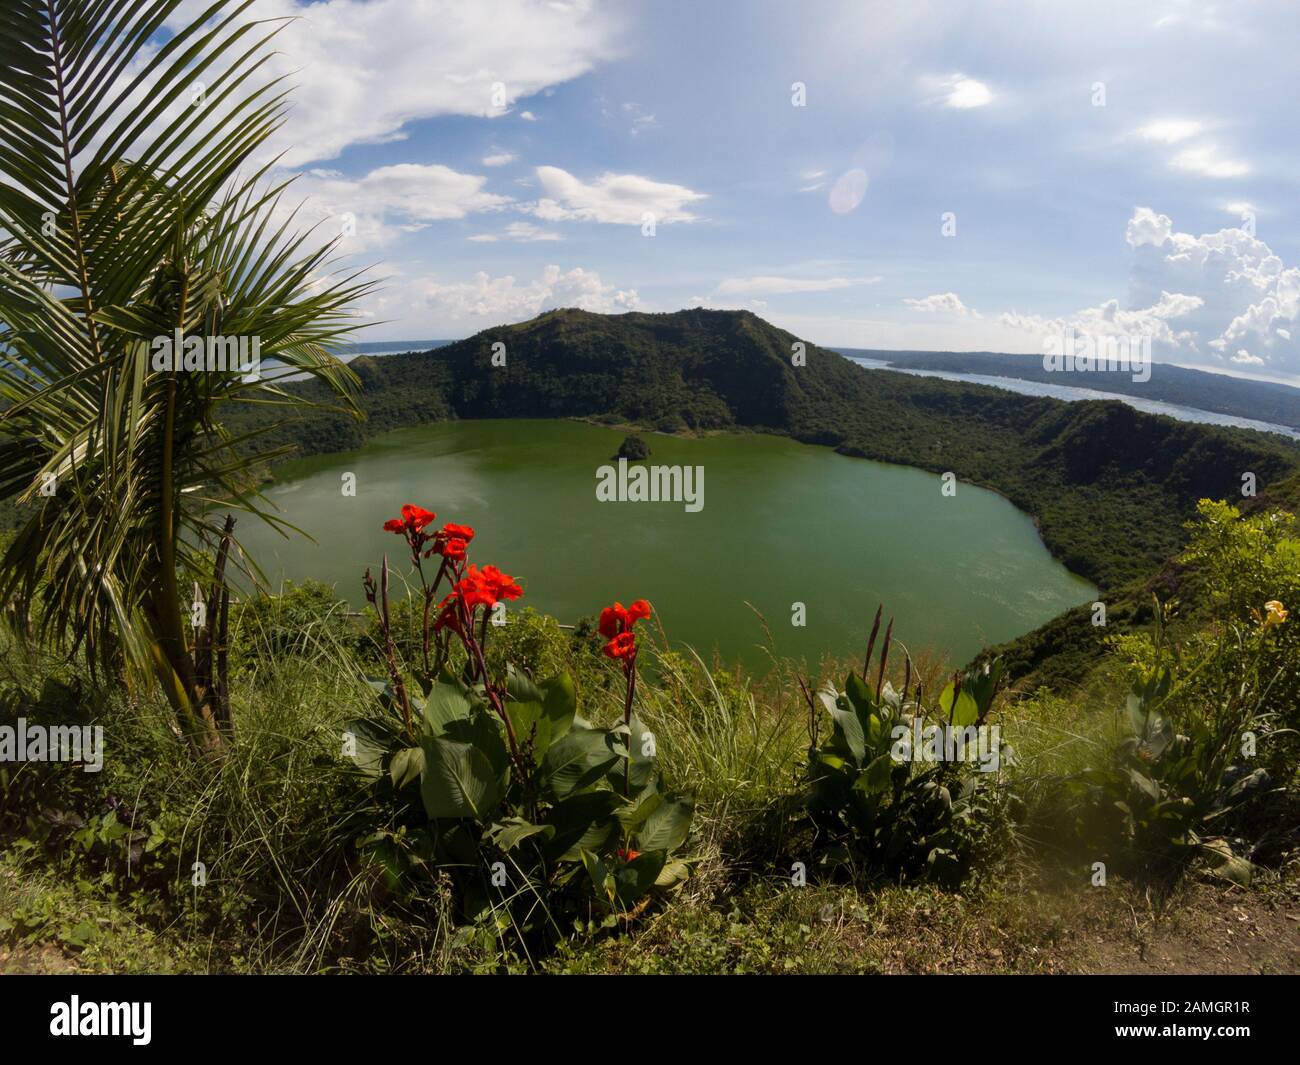 A view of the crater of Taal Volcano in Tagaytay, Philippines. Picture dating from 2018. Stock Photo